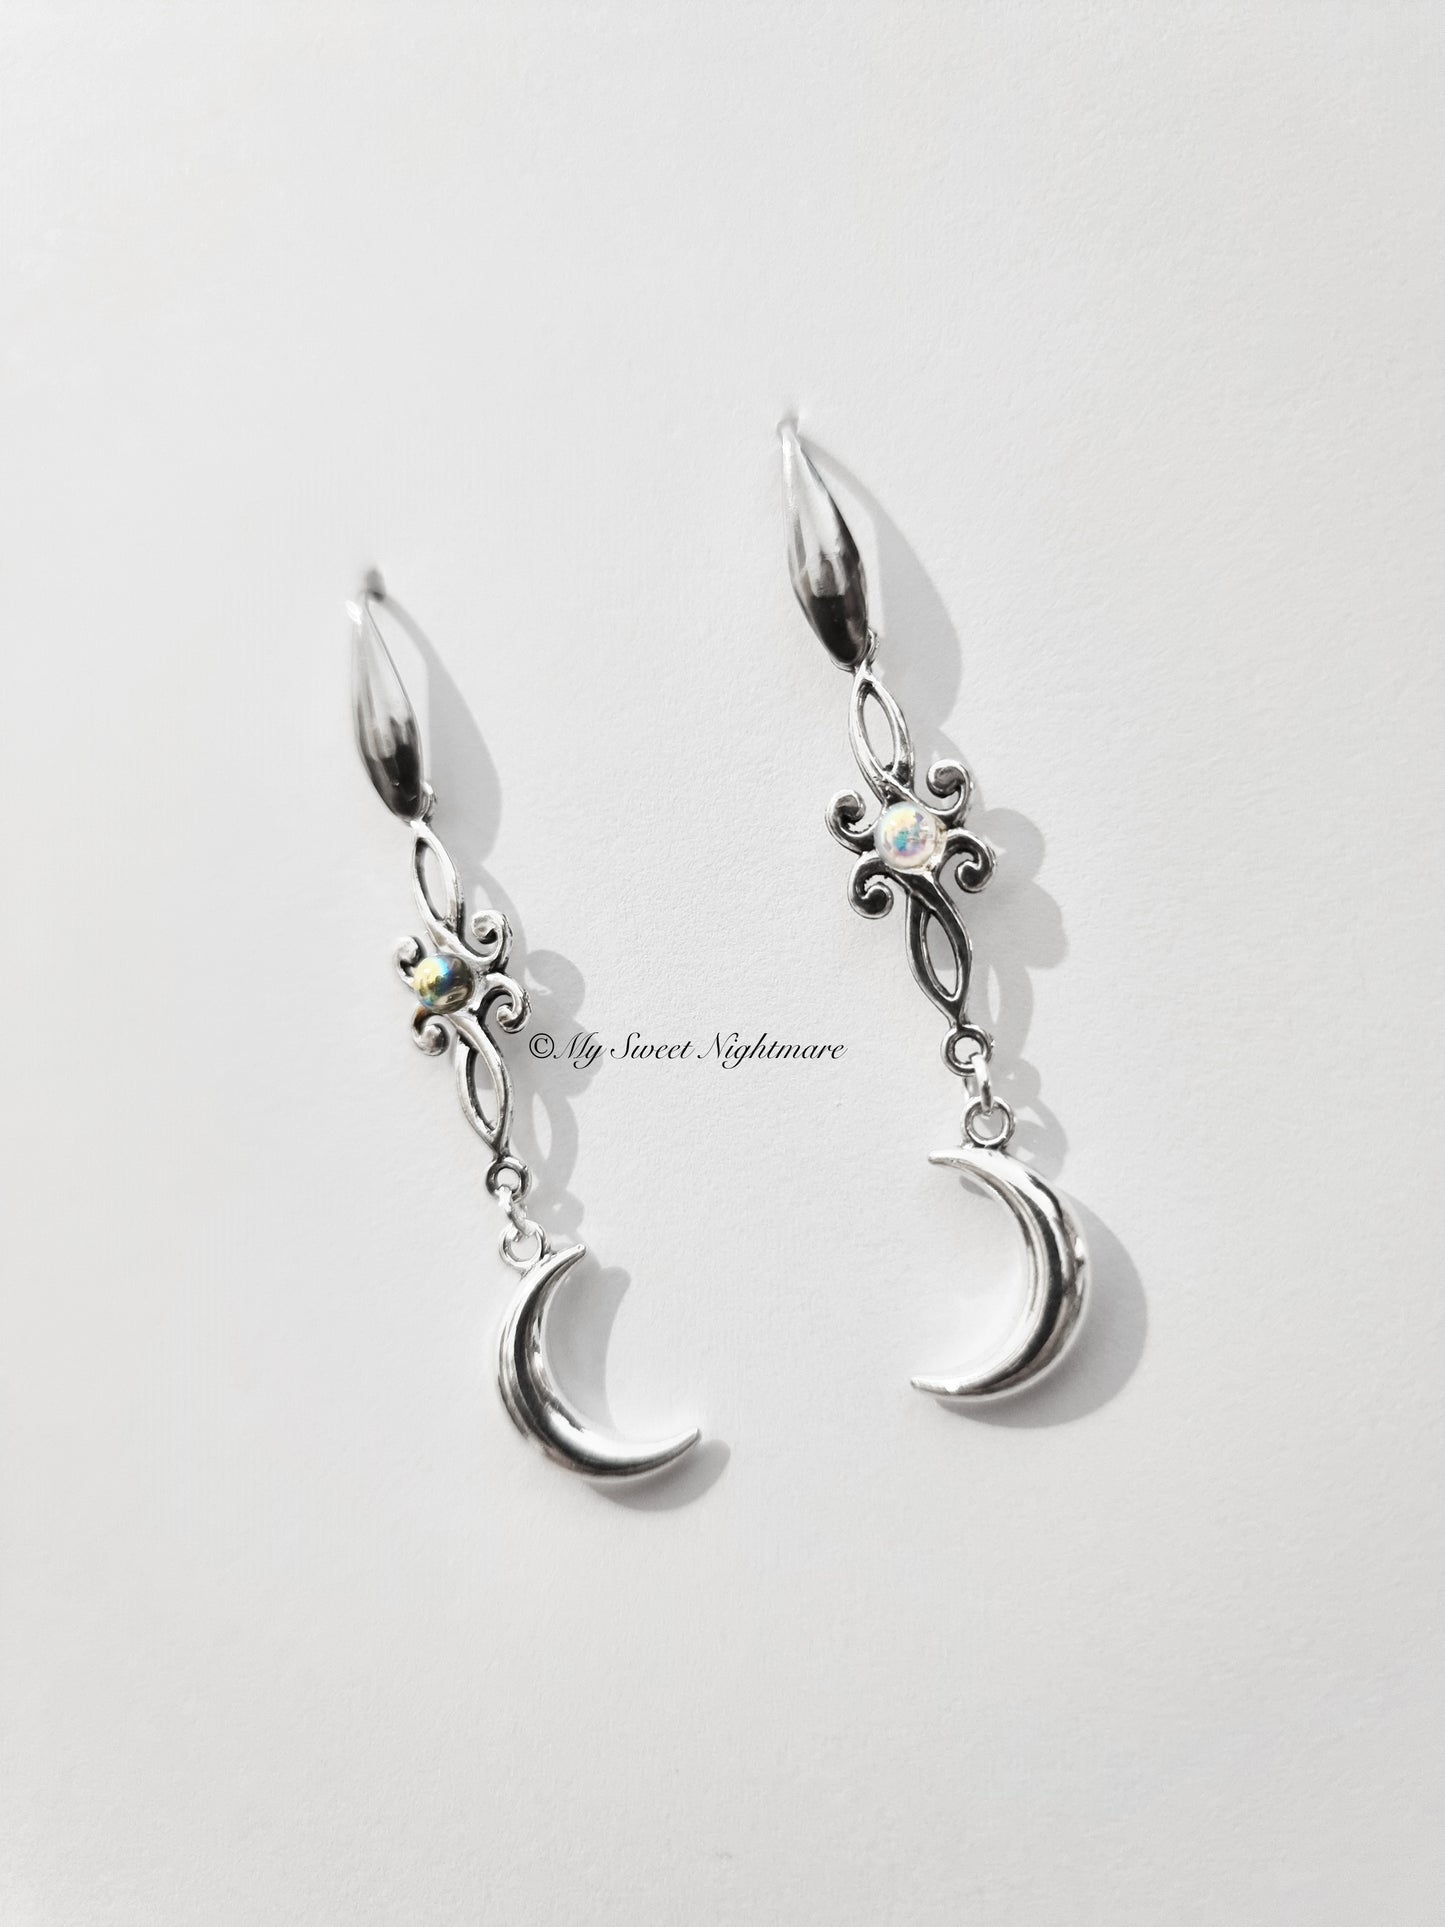 Celtic earrings with moons